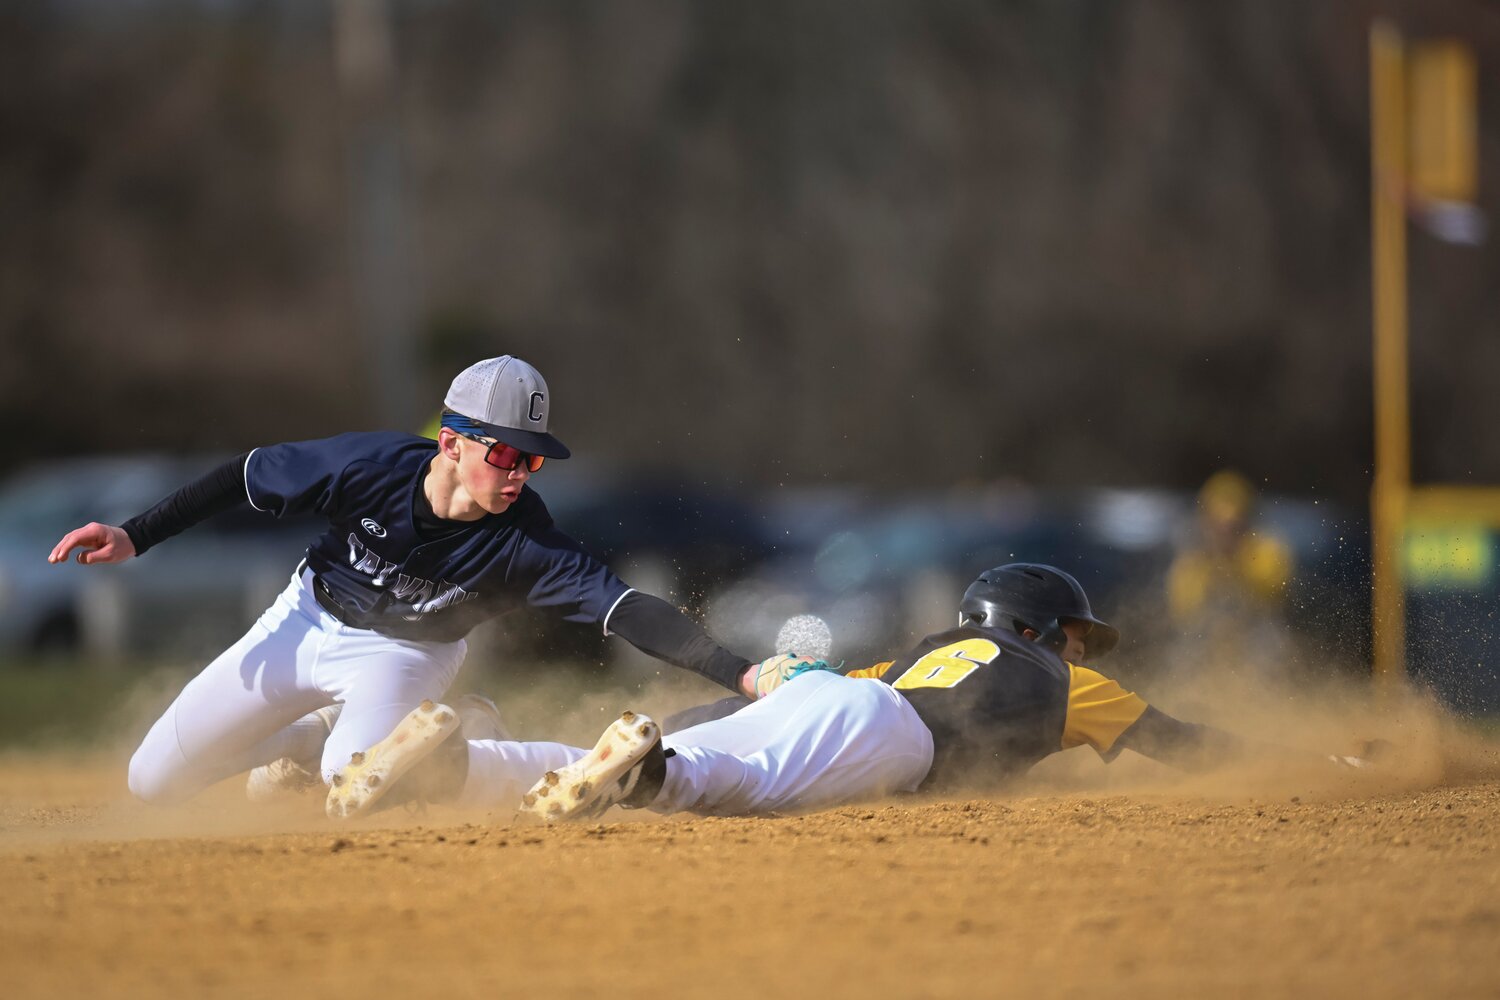 New Hope-Solebury’s Kieran Patel slides into second base ahead the tag of Calvary Christian shortstop Michael Prate during the first inning.